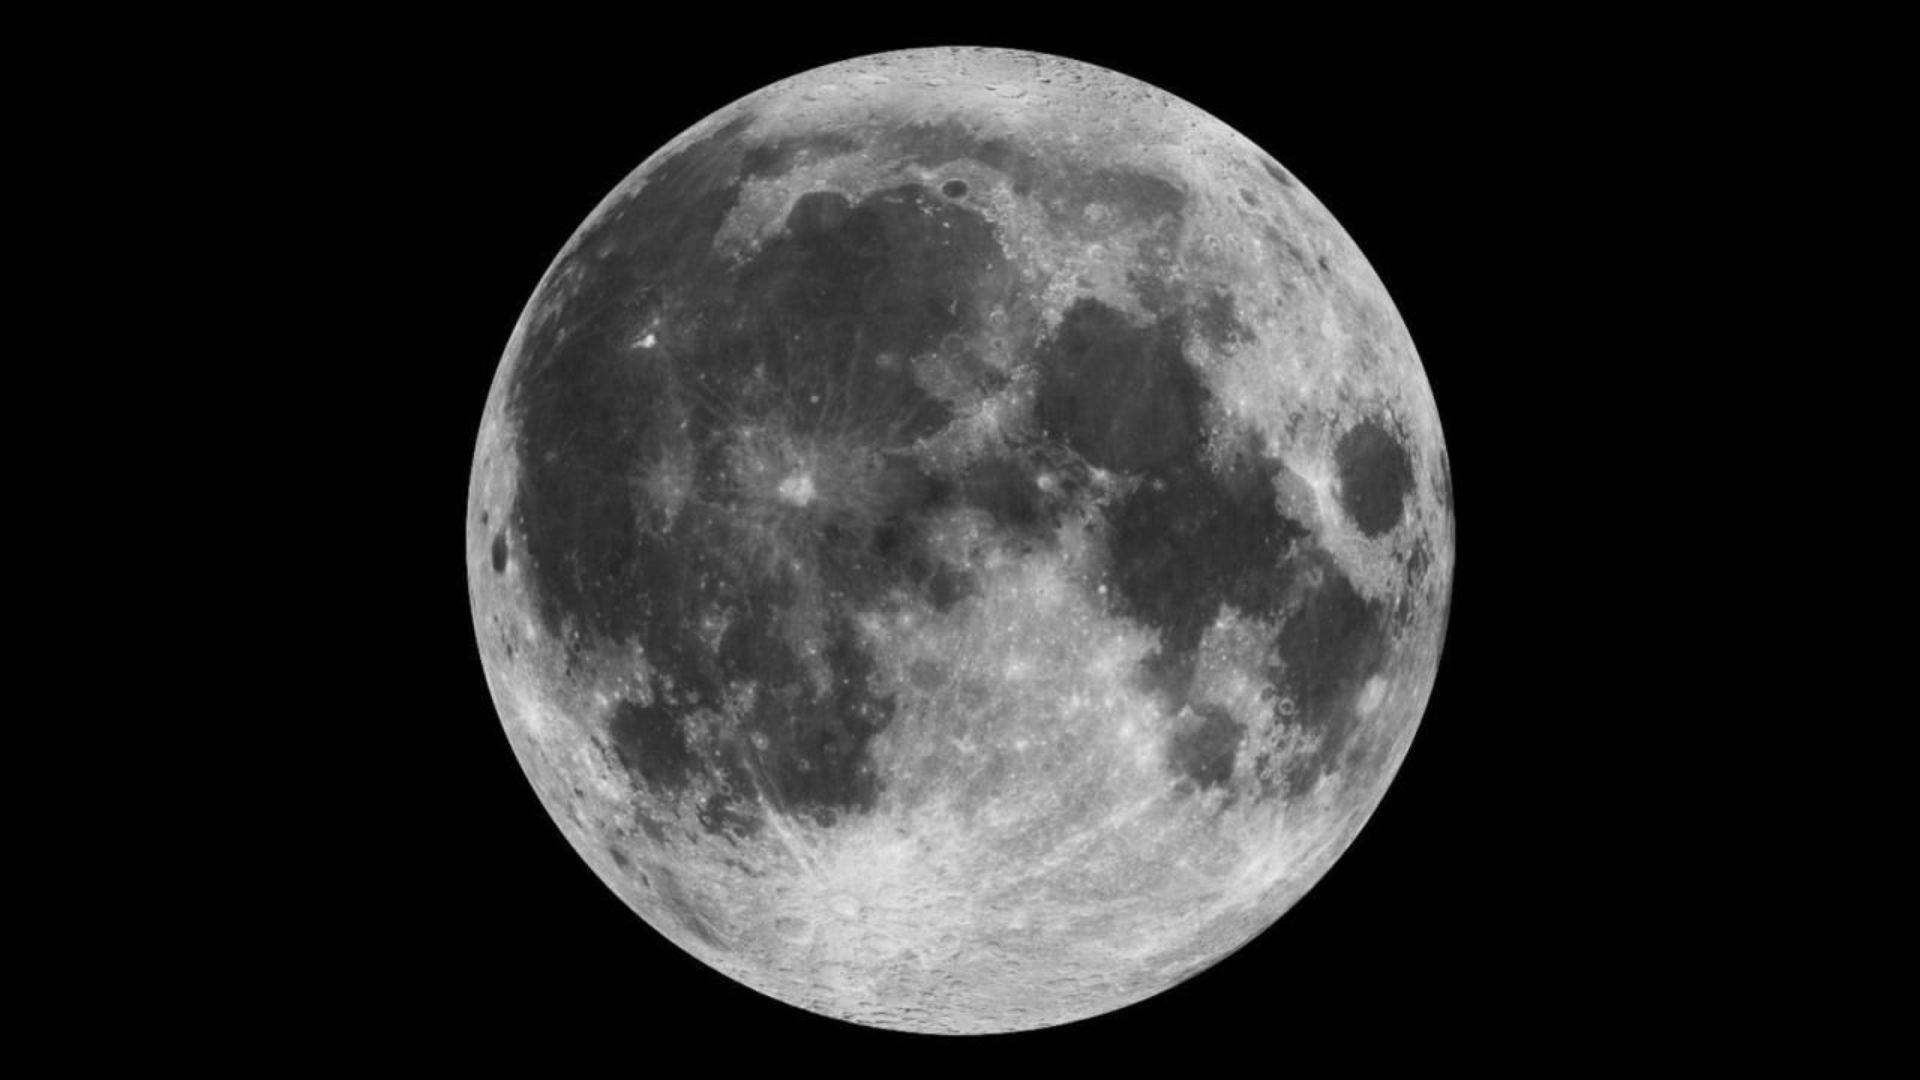 Moon Shrinking: NASA Scientists Confirm Surprising Lunar Changes And What They Mean